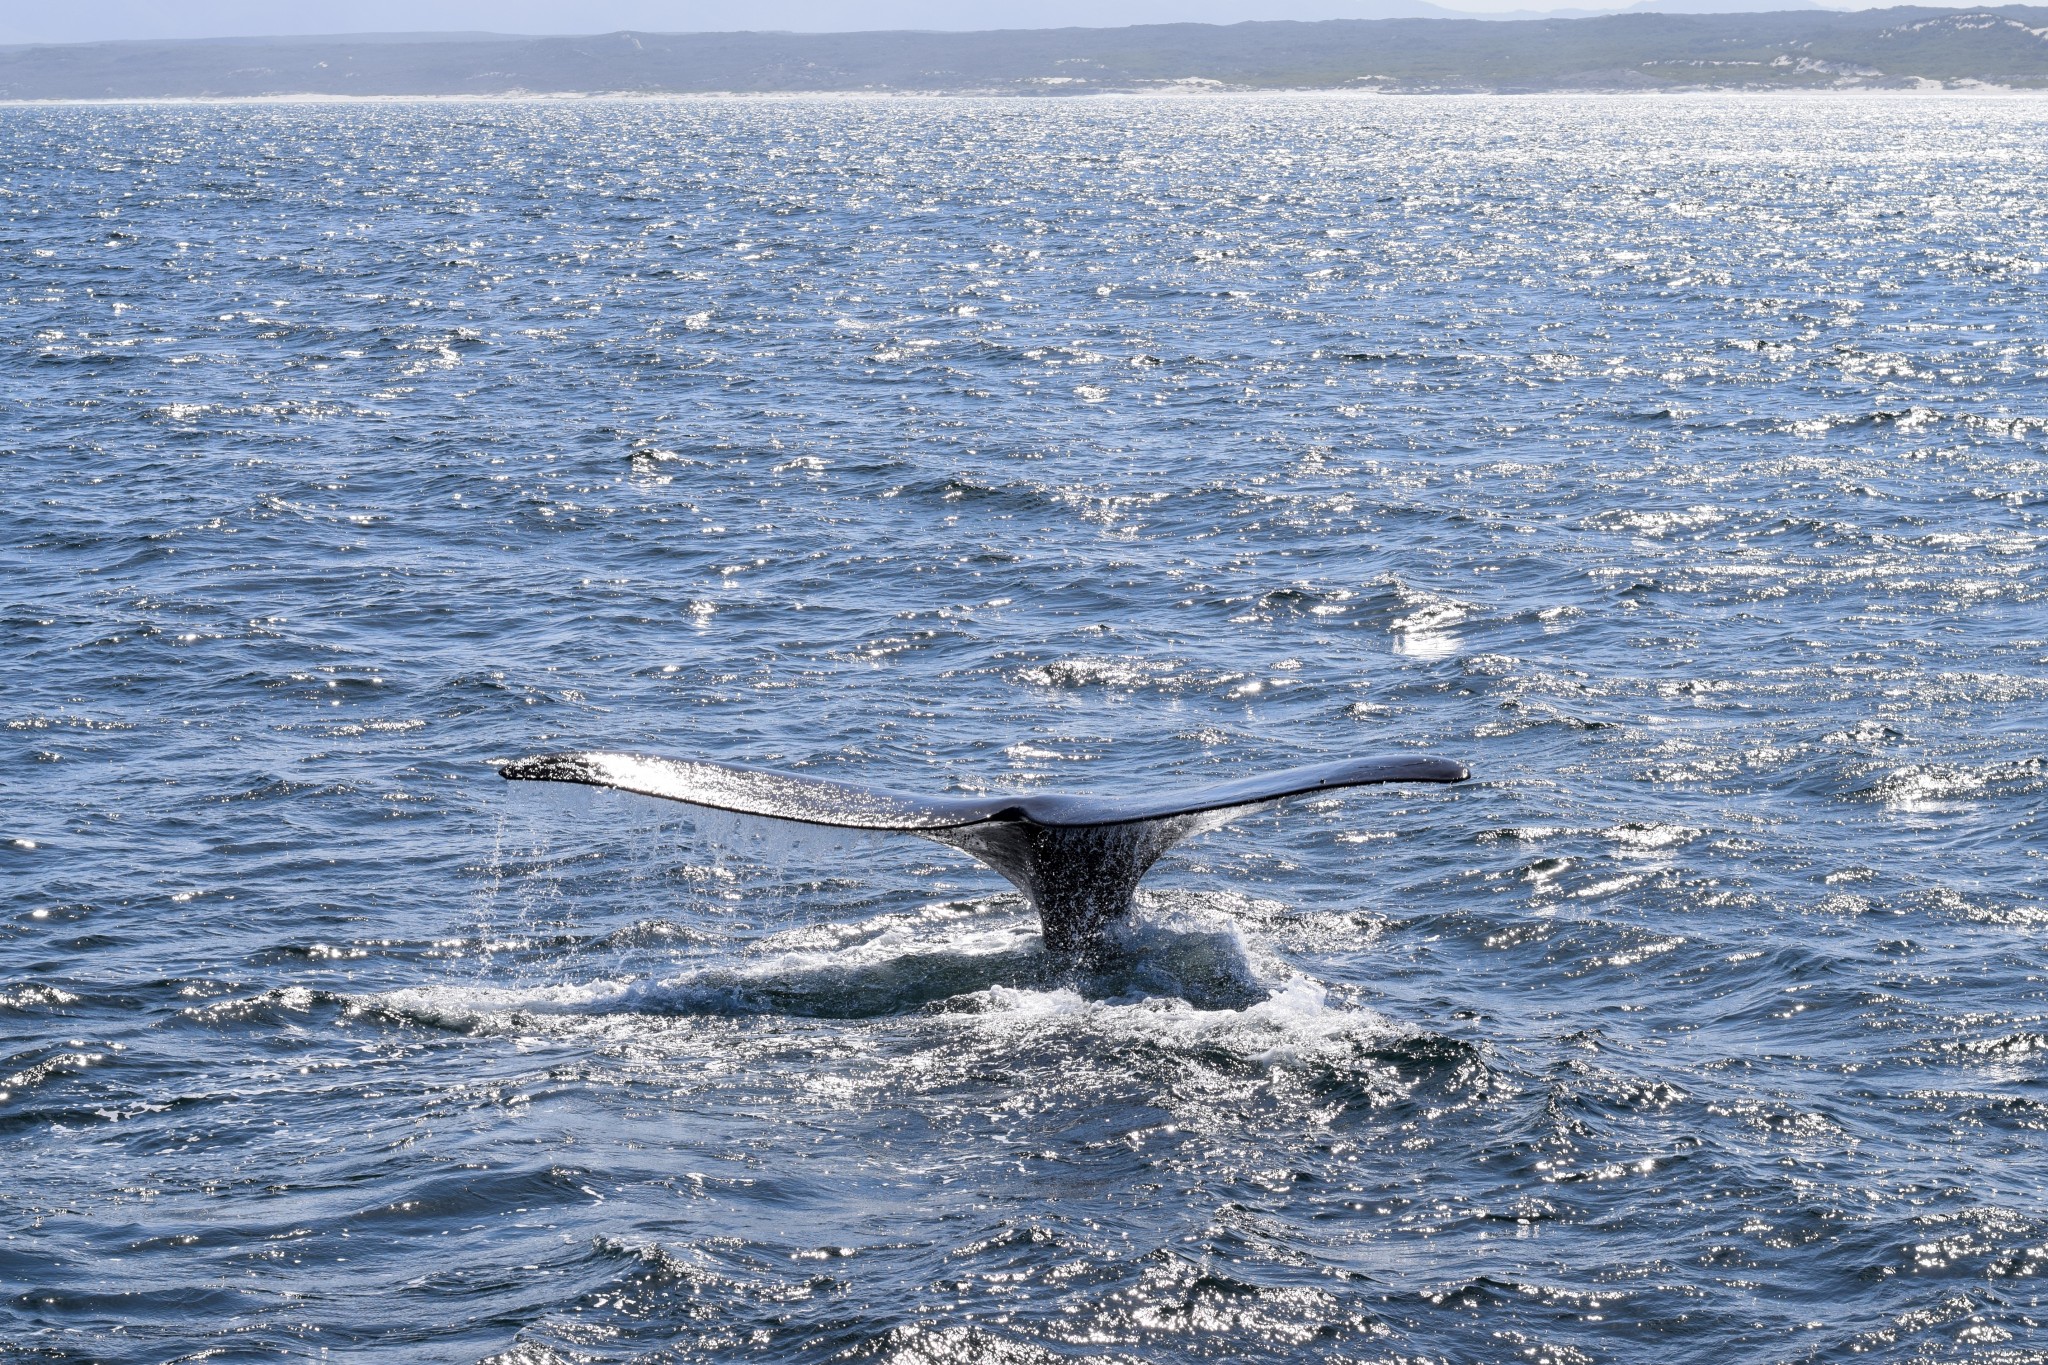 Fluke eines Southern Right Whales